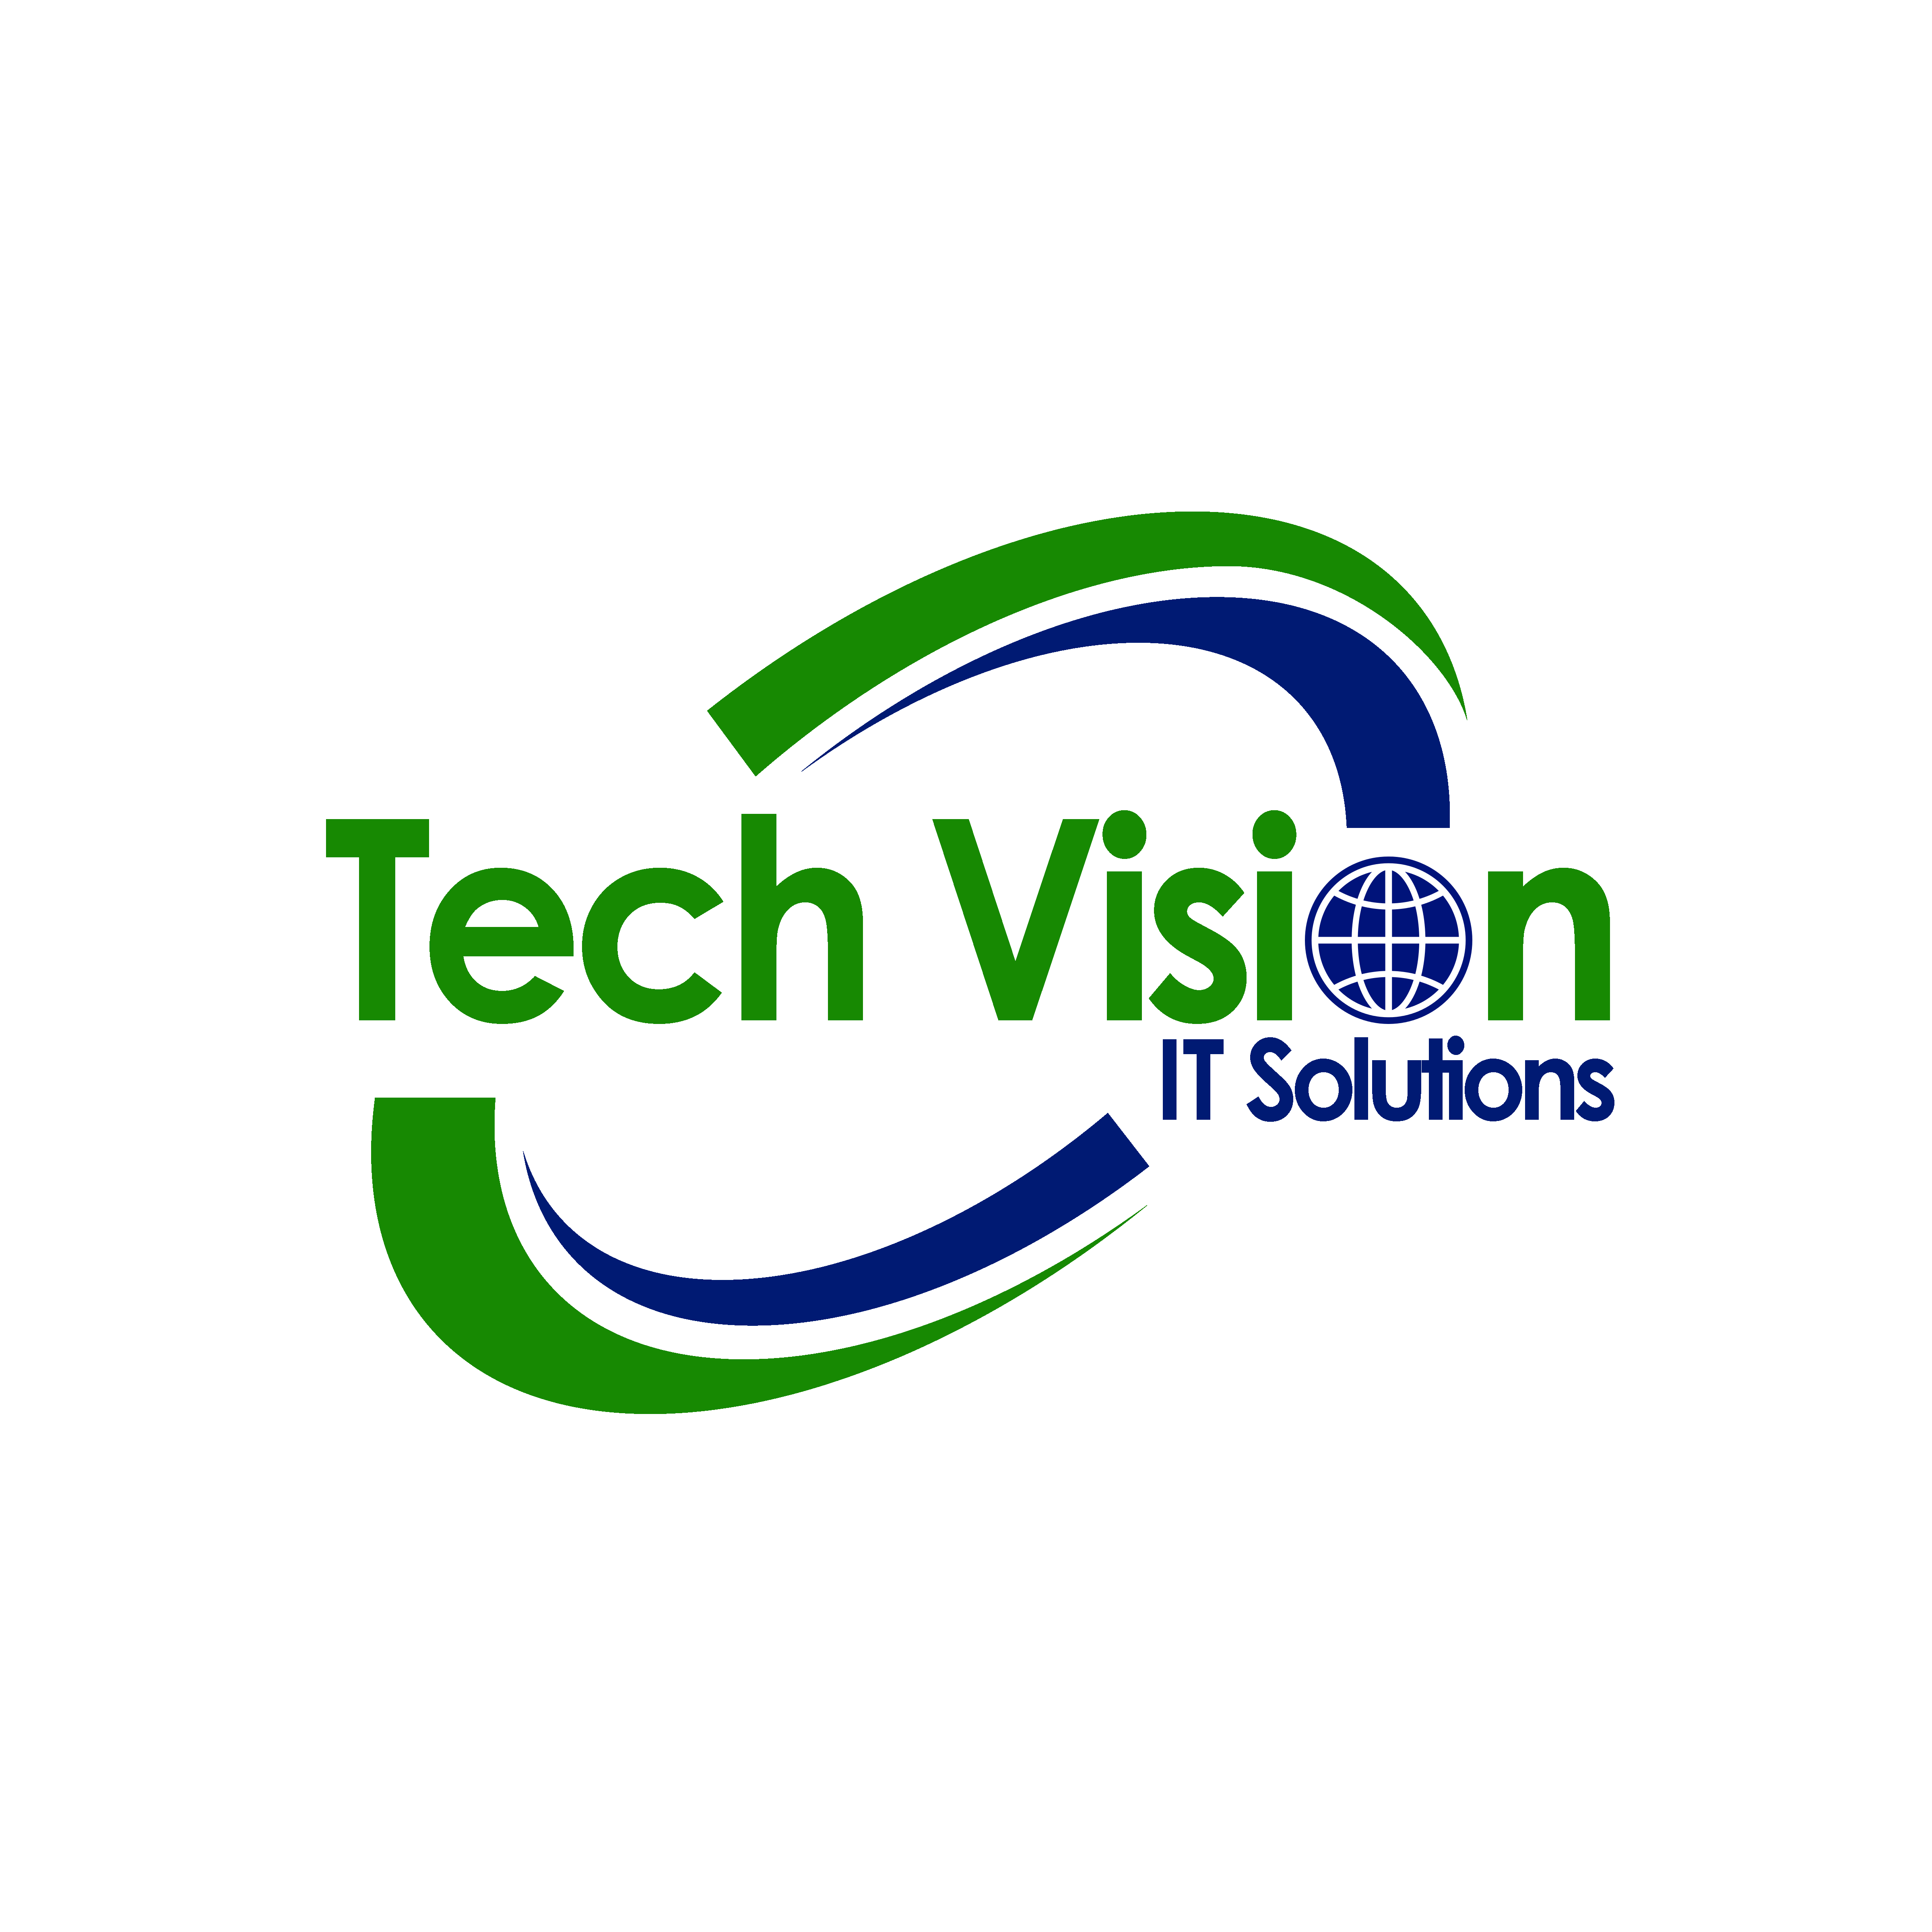 More about Tech Vision IT Solutions